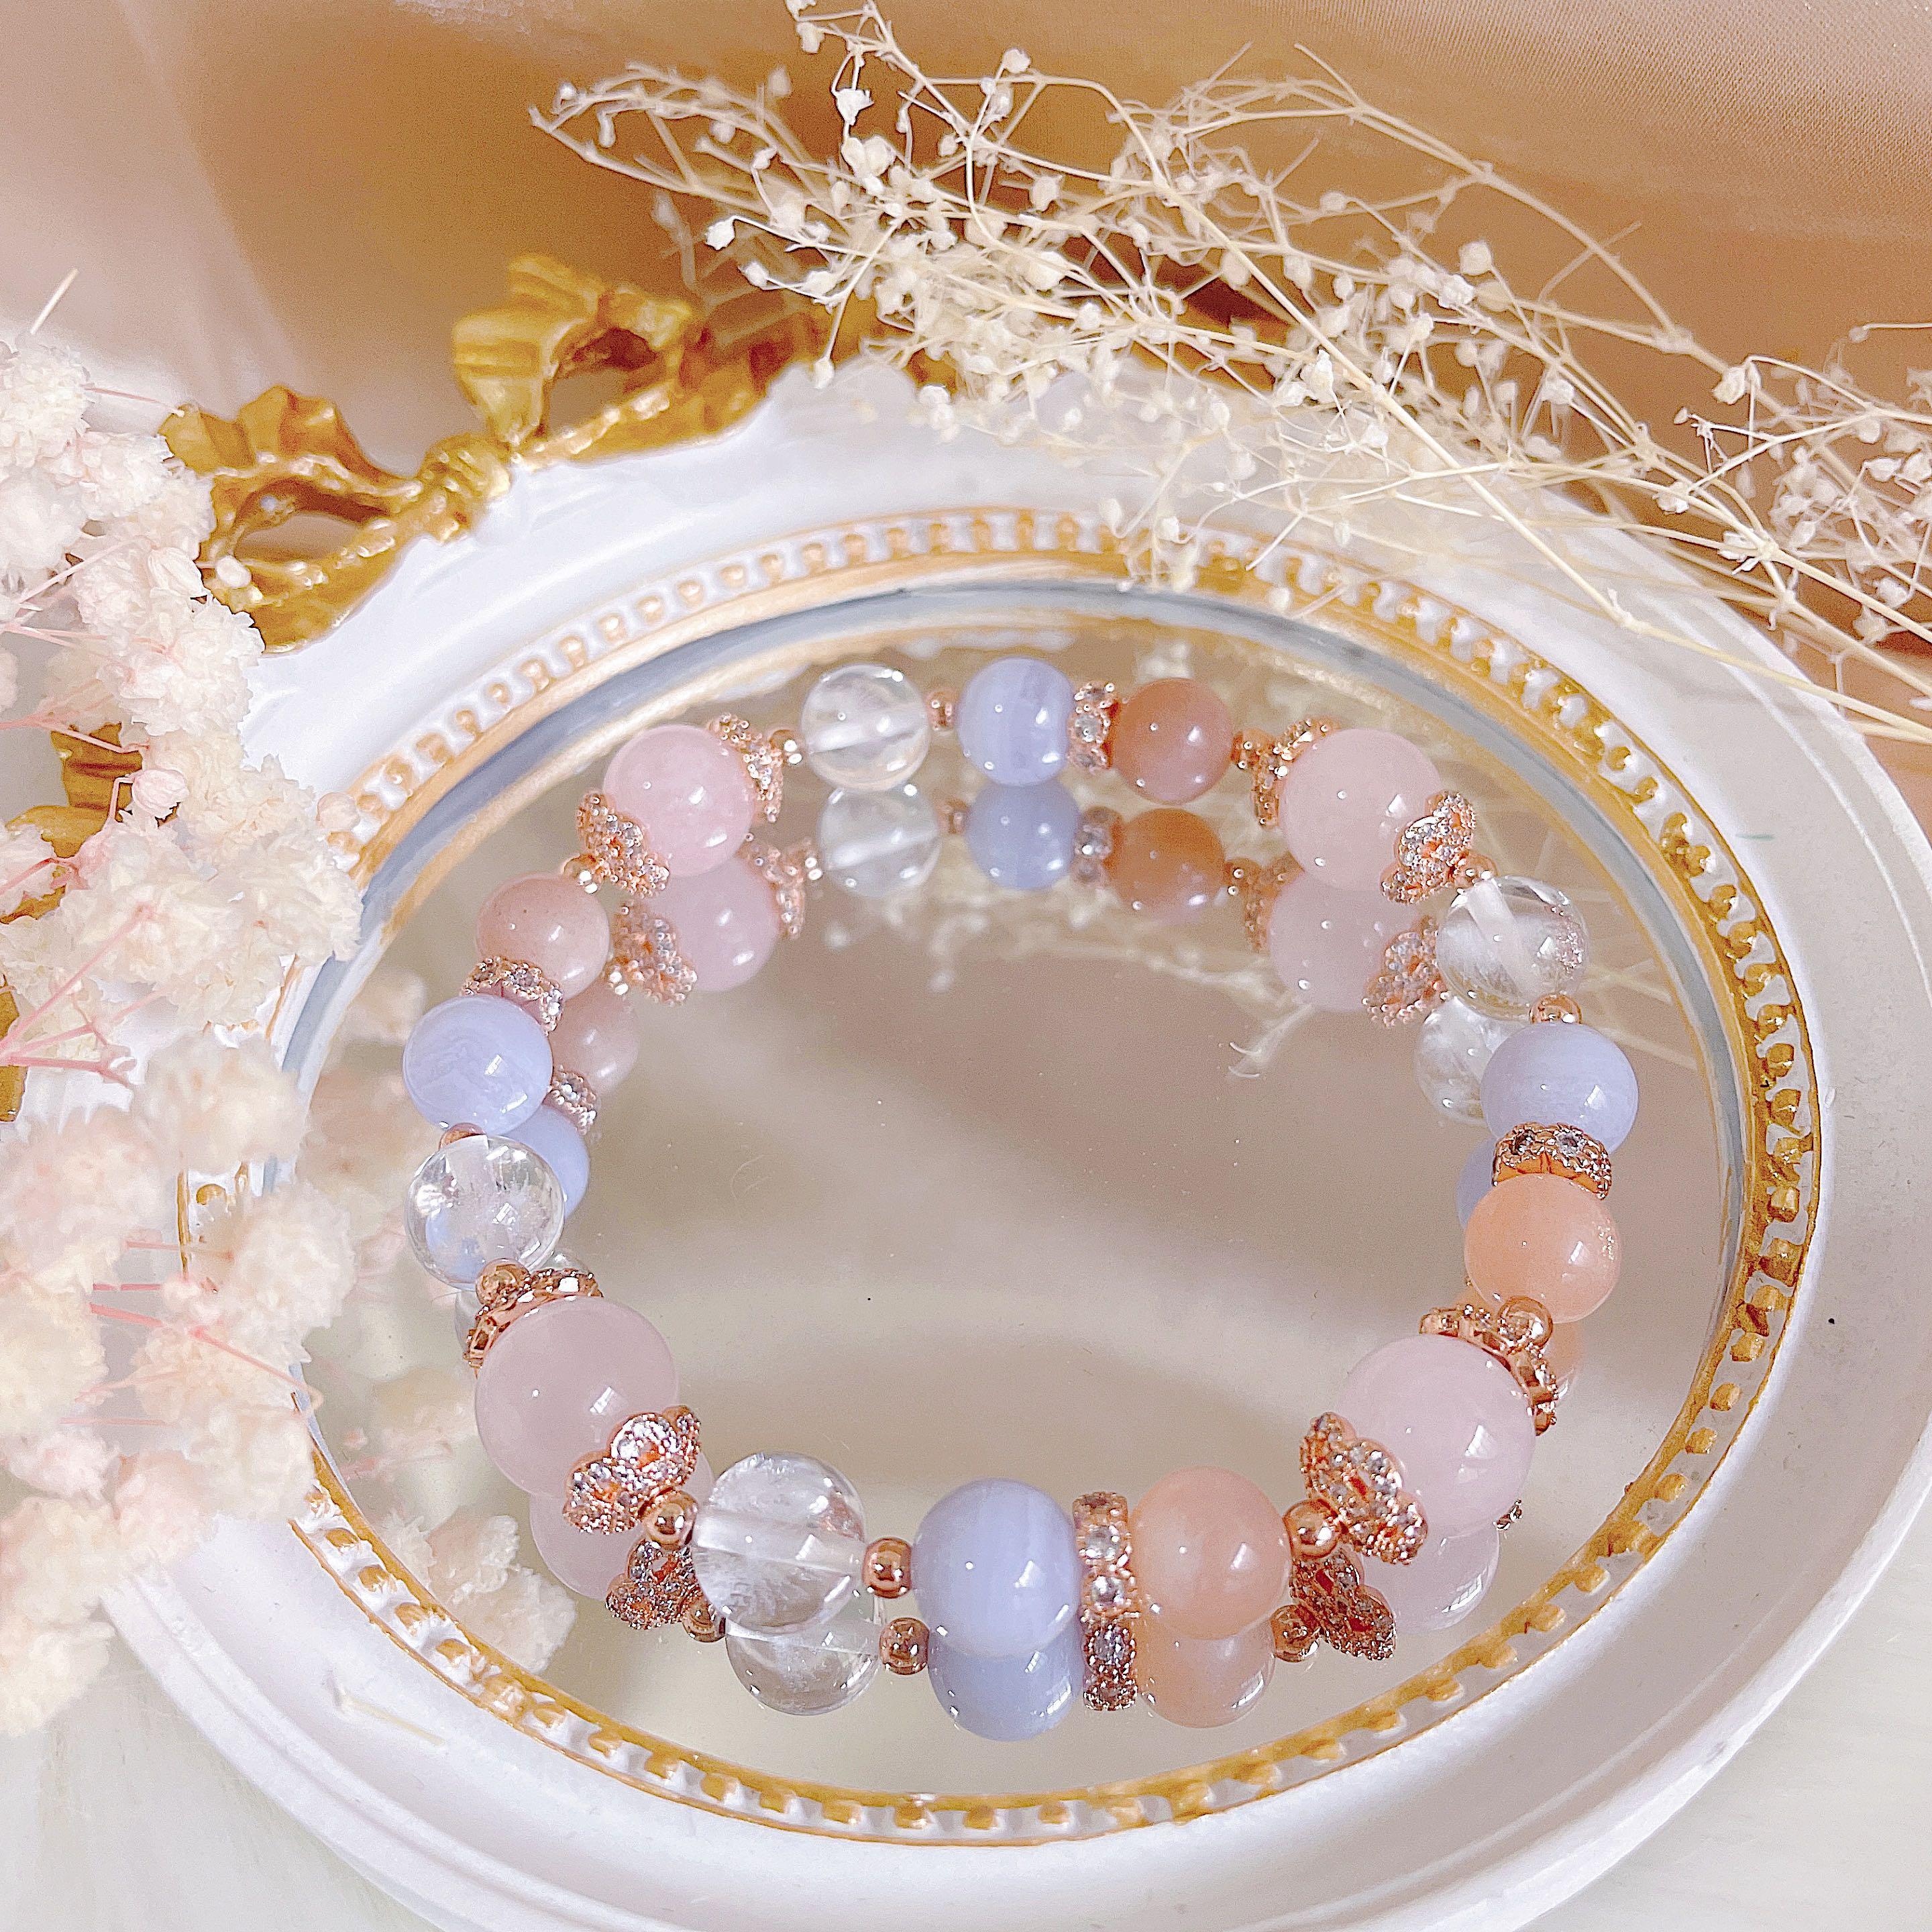 1 Strand Adabele Natural Multi Colors Moonstone Healing Gemstone Smooth  Free Form 5-8mm Loose Stone Chip Beads 32 Inch for Jewelry Craft Making  GZ1-25